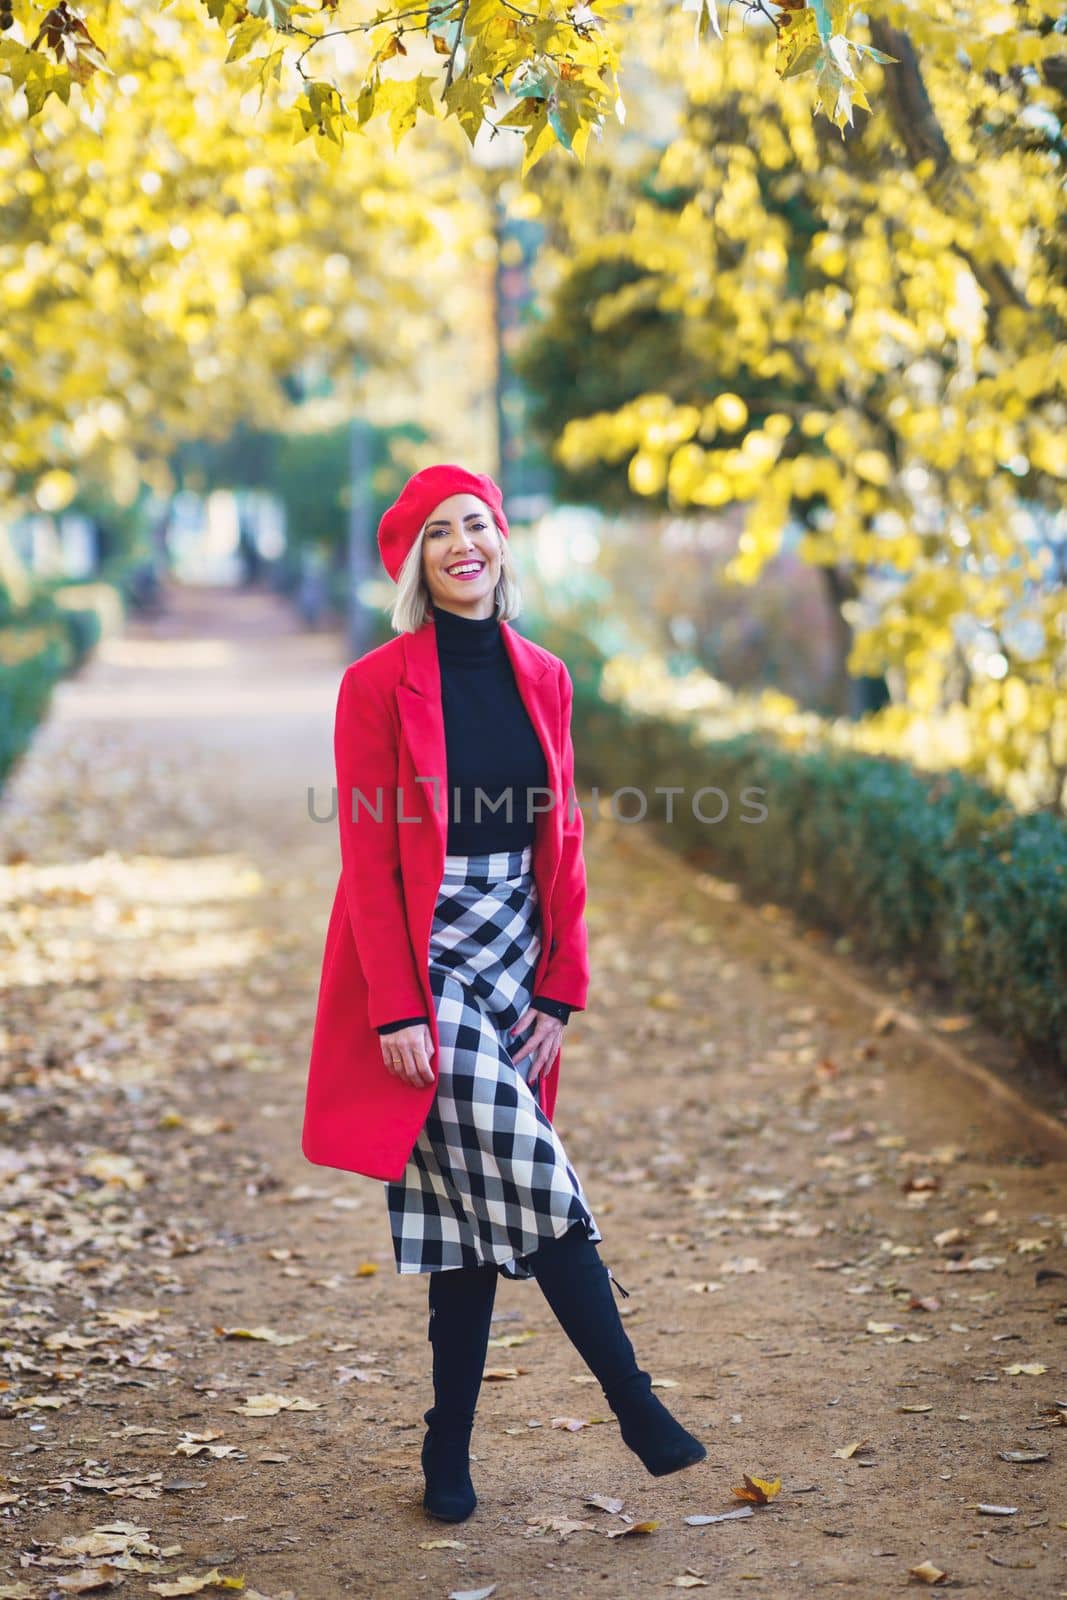 Full body of positive female in stylish outfit looking at camera while standing on pathway in autumn park with trees